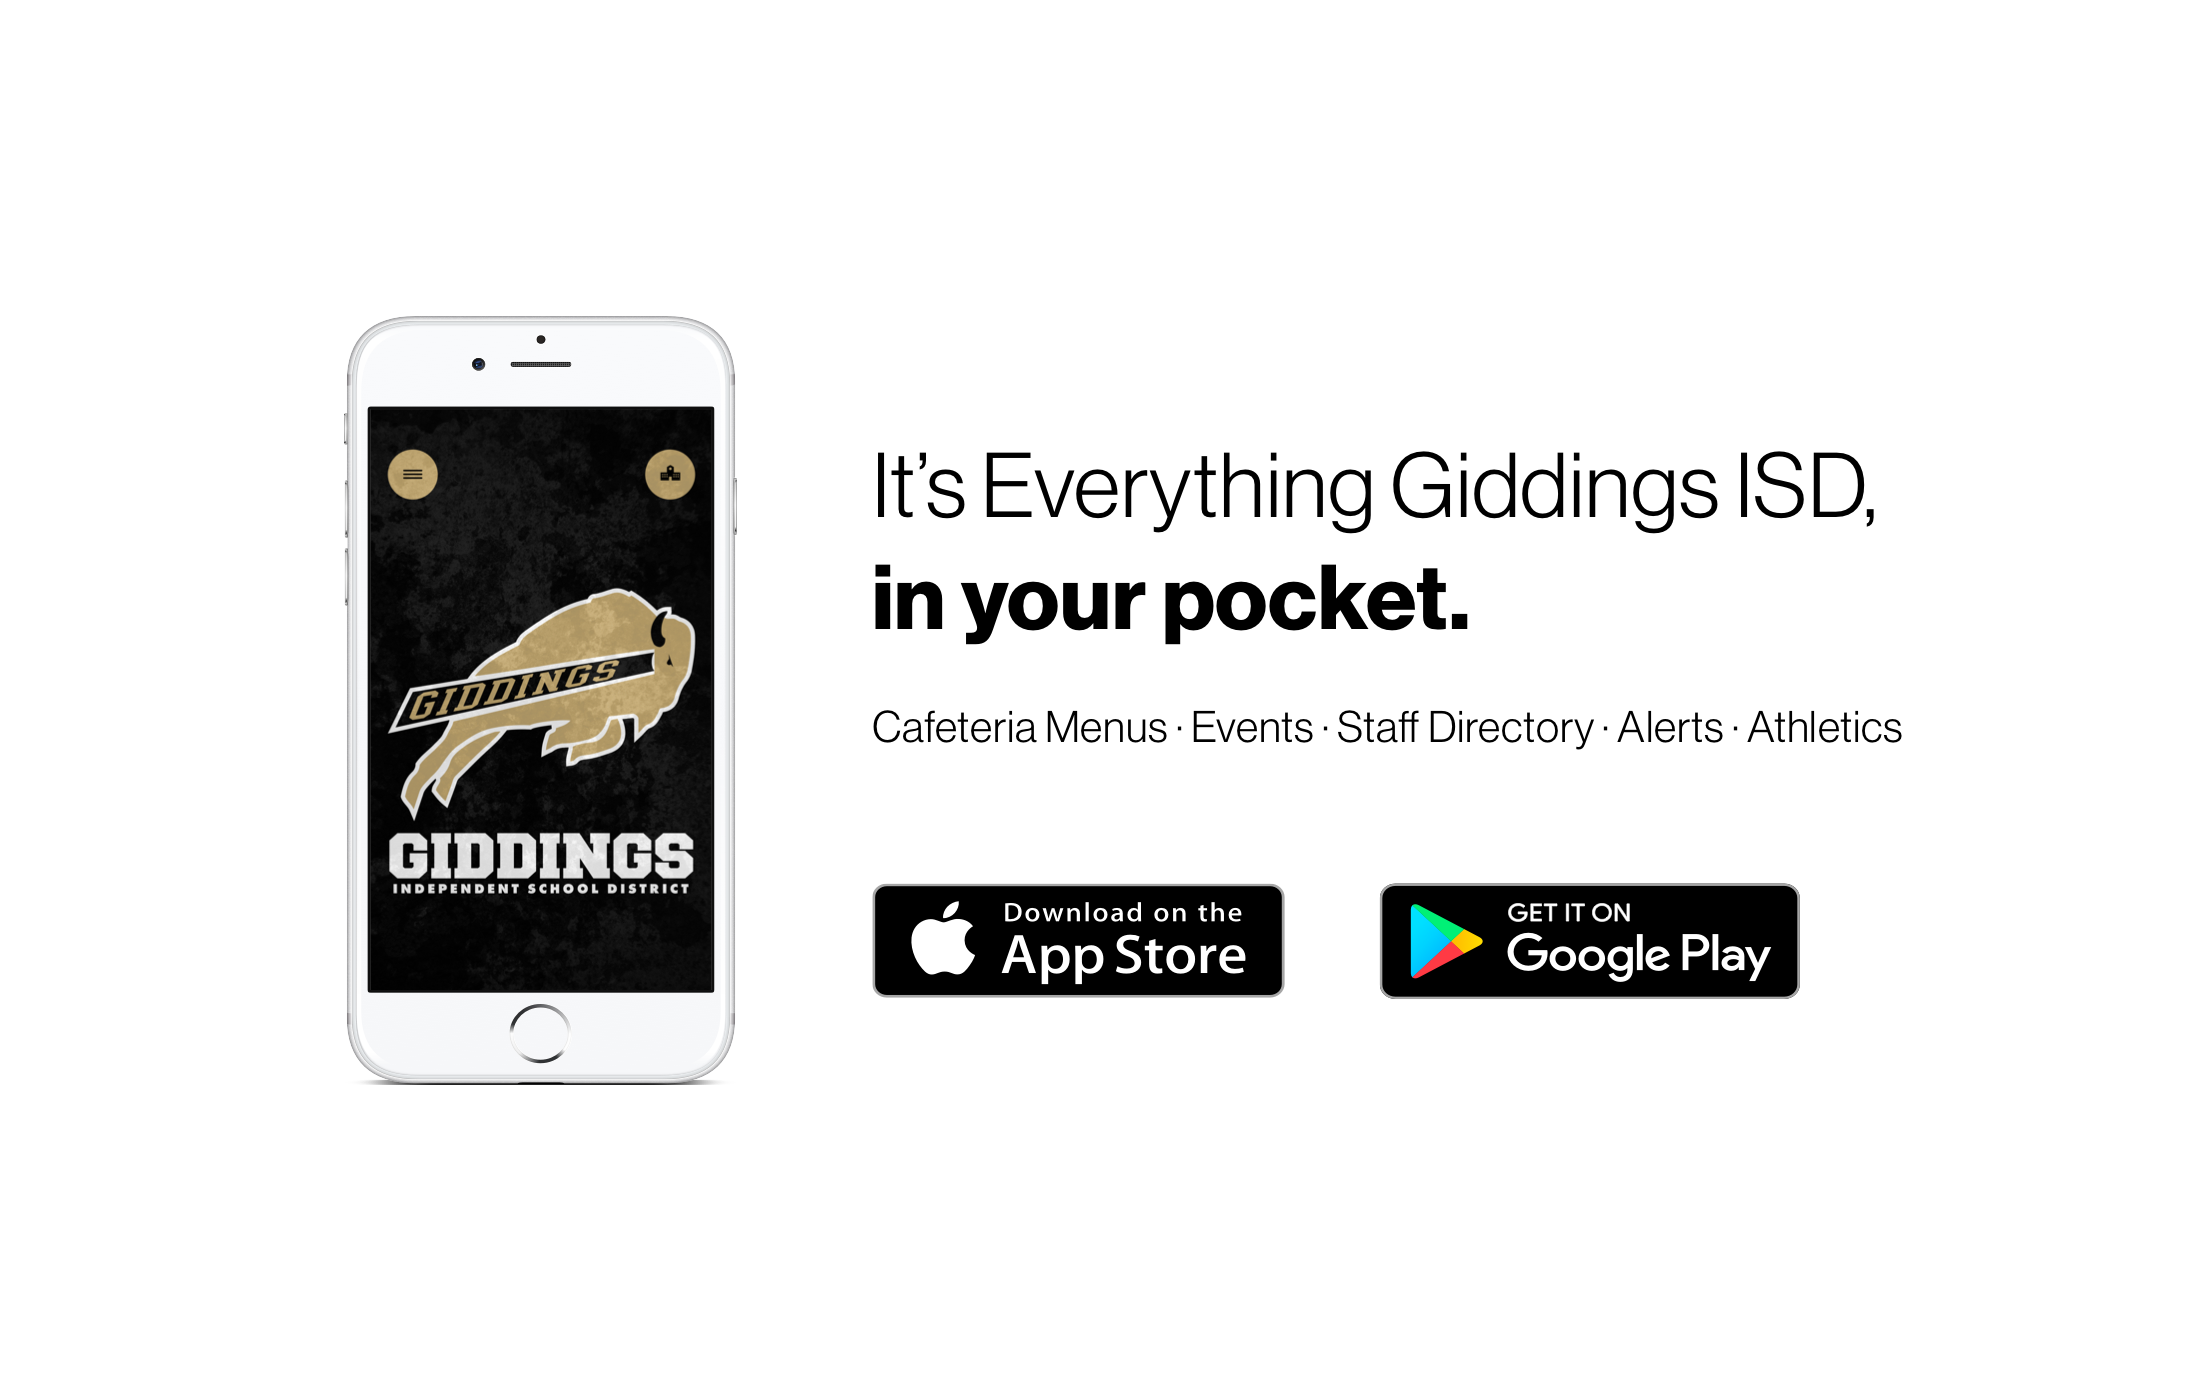 Giddings ISD is proud to announce a new iOS and Android app!